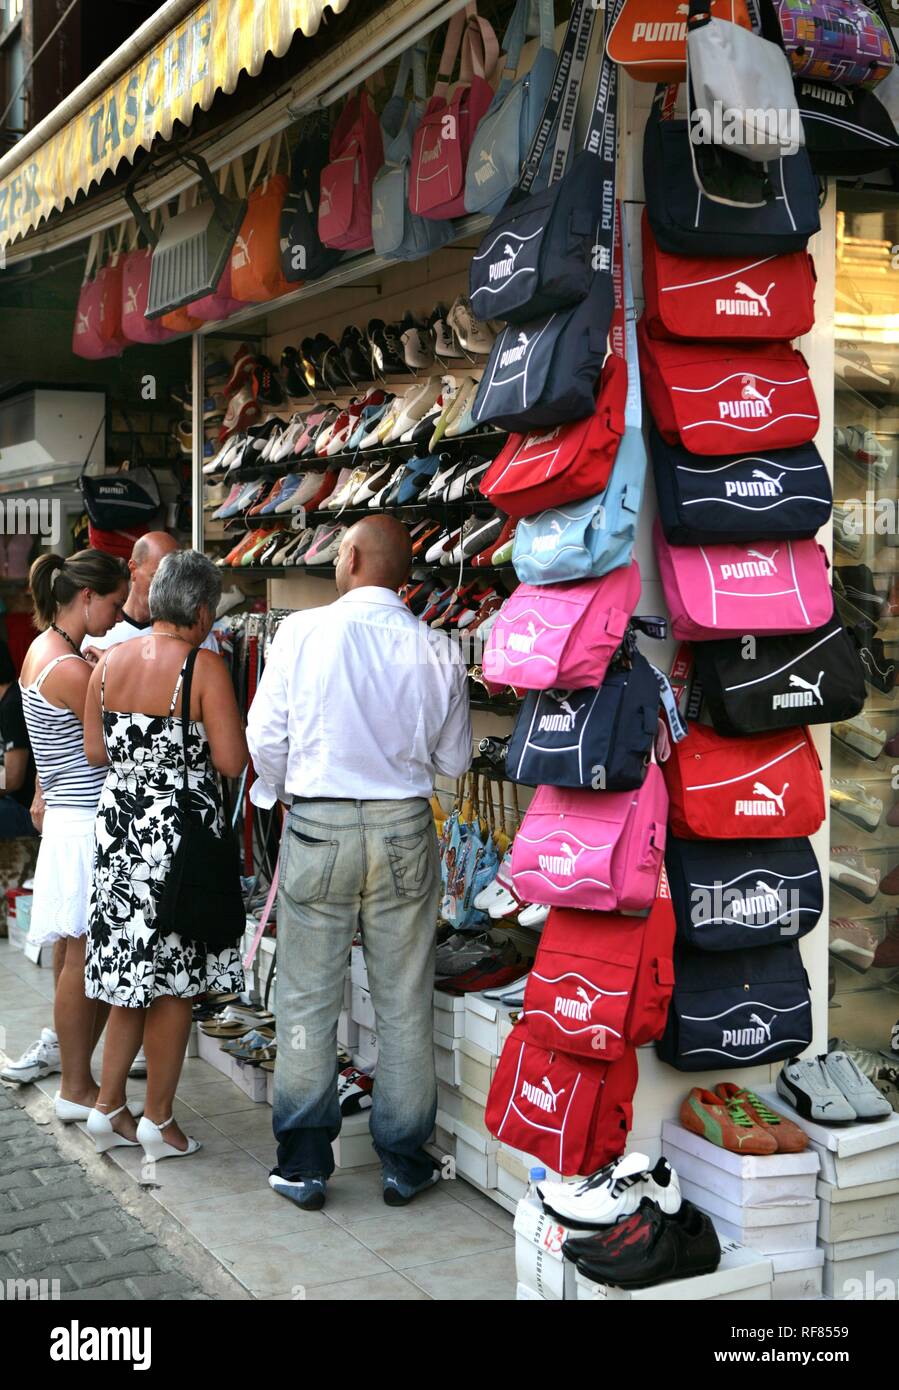 TUR Turkey Side Turkish riviera. Shop with fake products Puma shoes and  bags in the old town Stock Photo - Alamy